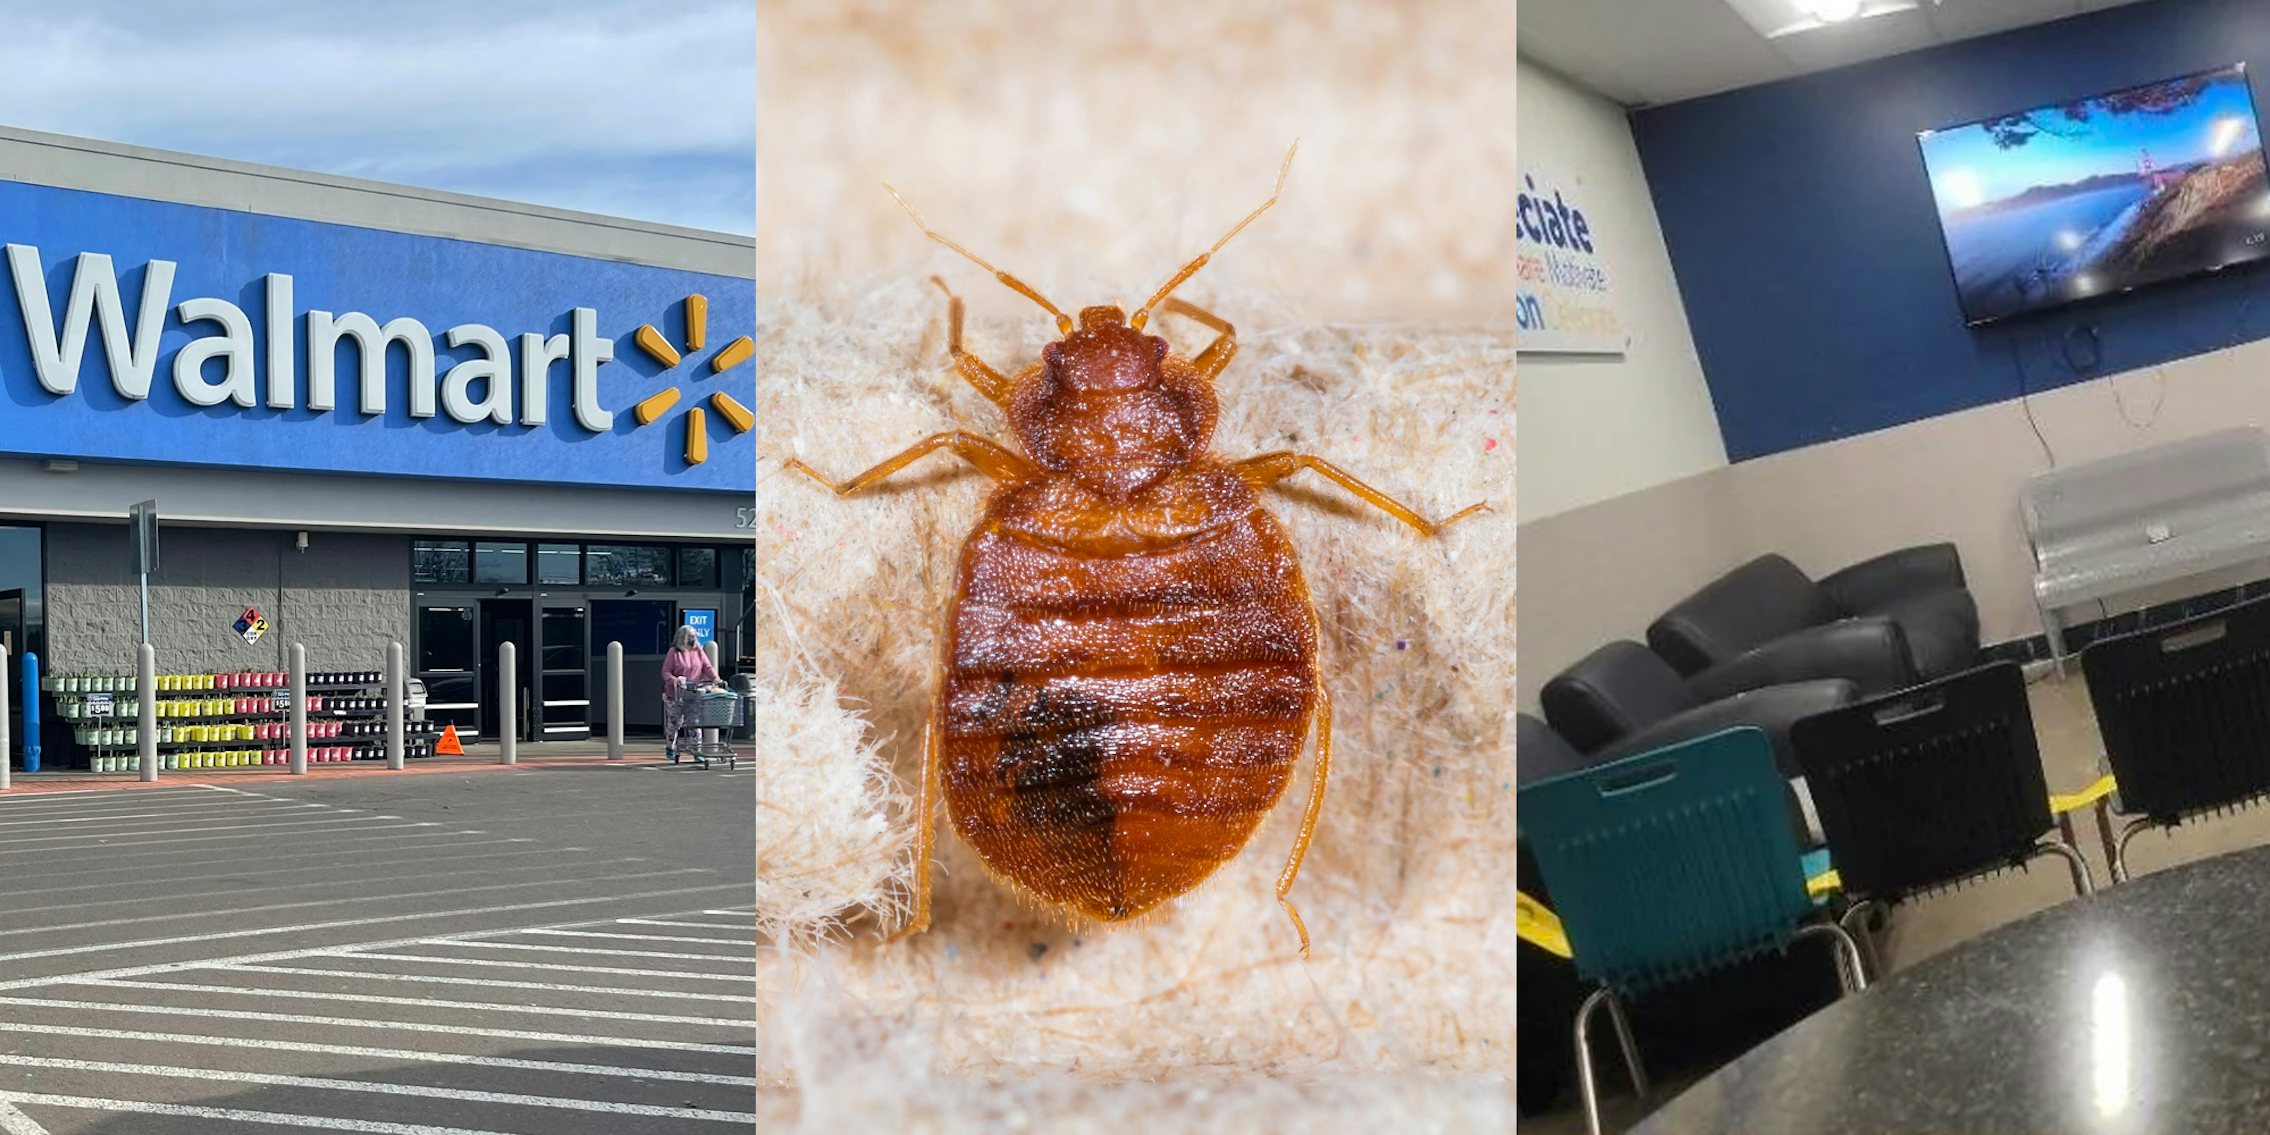 Walmart building with sign (c) bed bug up close (c) Walmart break room with chairs and tape (r)